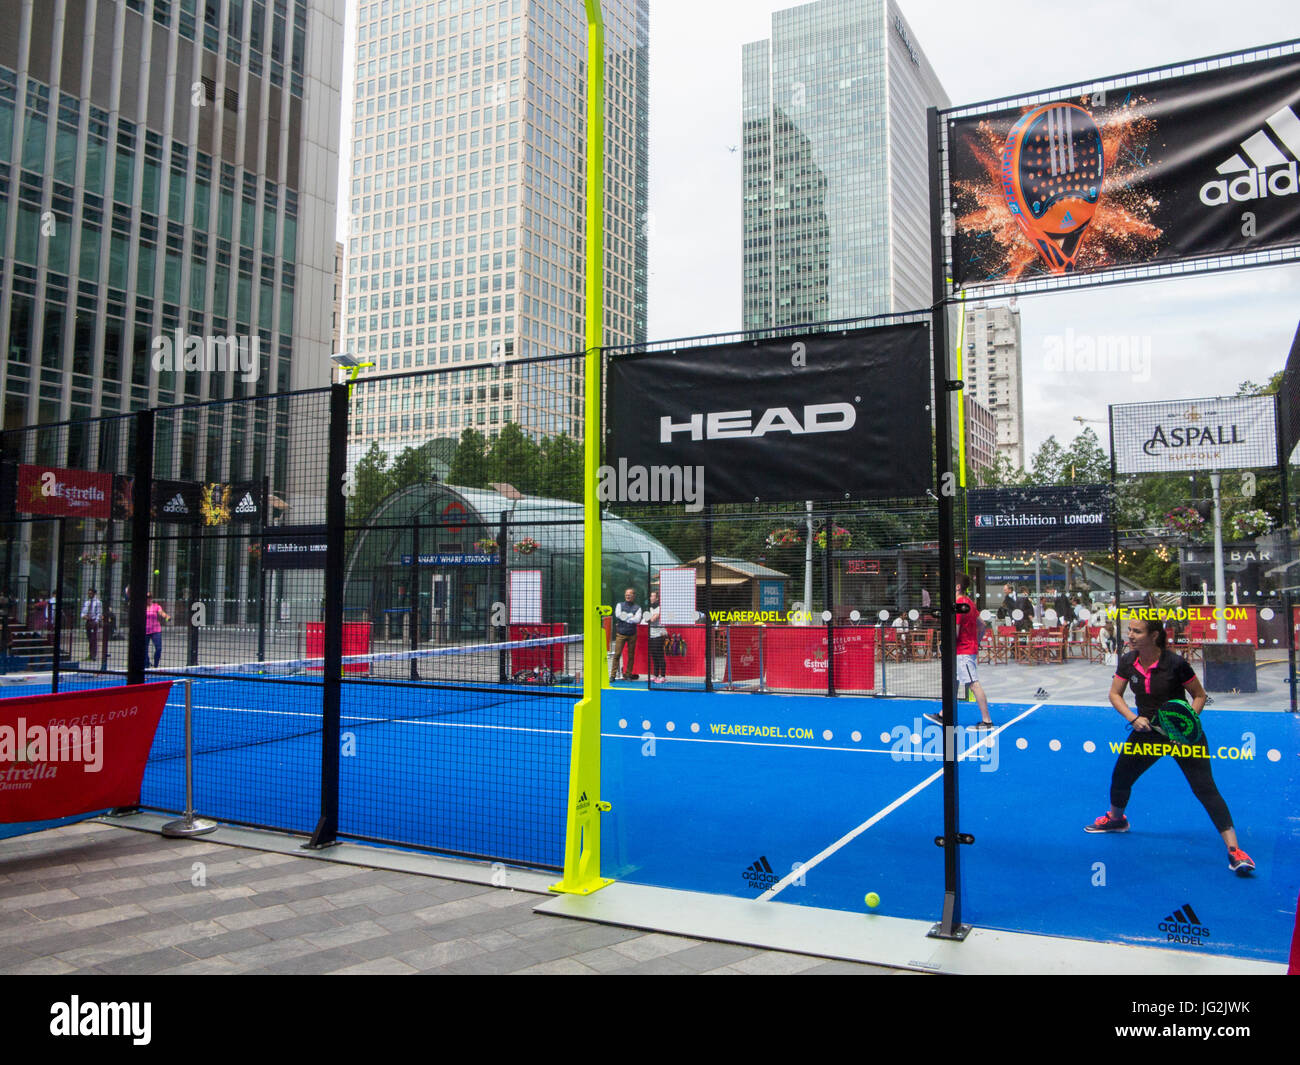 Padel tennis in the Docklands area of London, surrounded by high rise  offices Stock Photo - Alamy